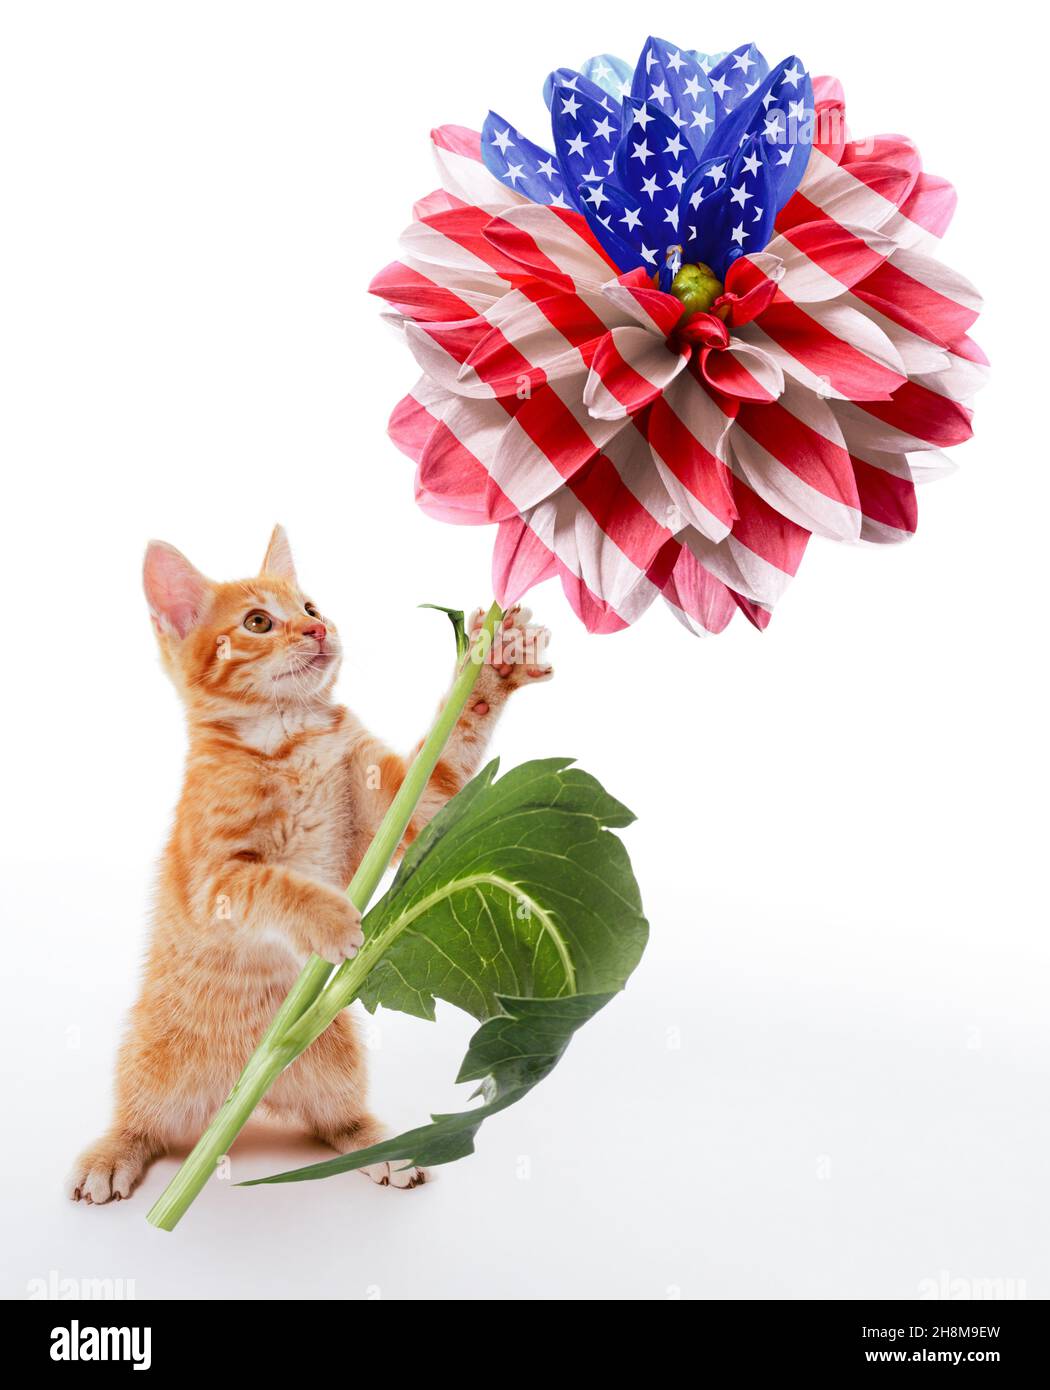 Election and voting concept. A funny ginger kitten stands and holds in its paws an unusual American flag made of a dahlia flower Stock Photo